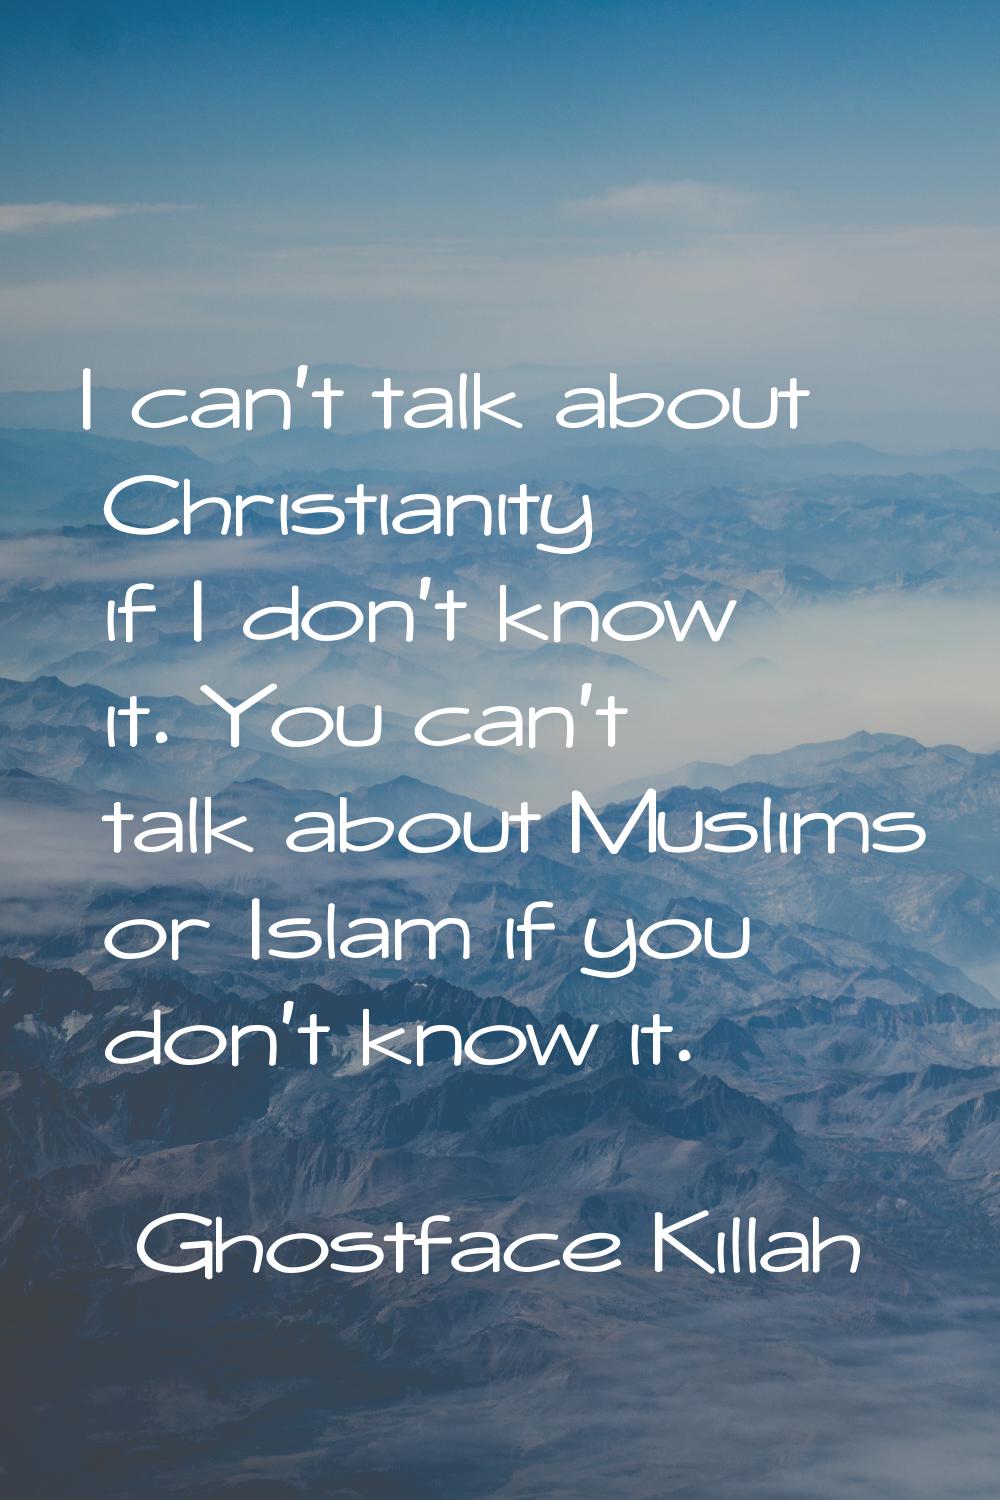 I can't talk about Christianity if I don't know it. You can't talk about Muslims or Islam if you do